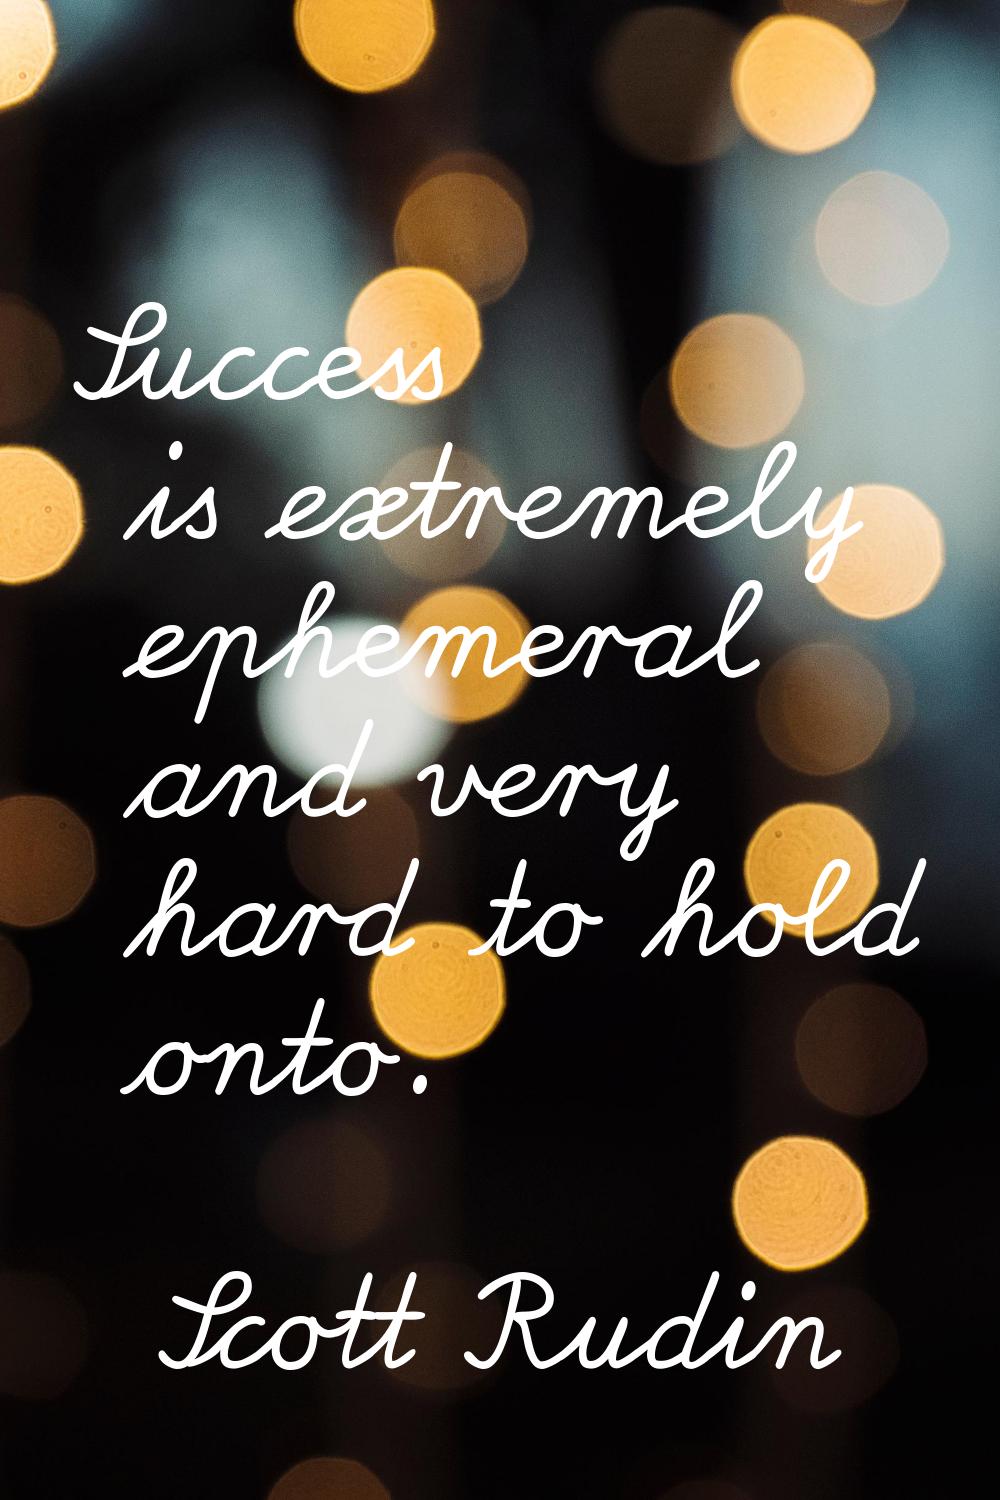 Success is extremely ephemeral and very hard to hold onto.